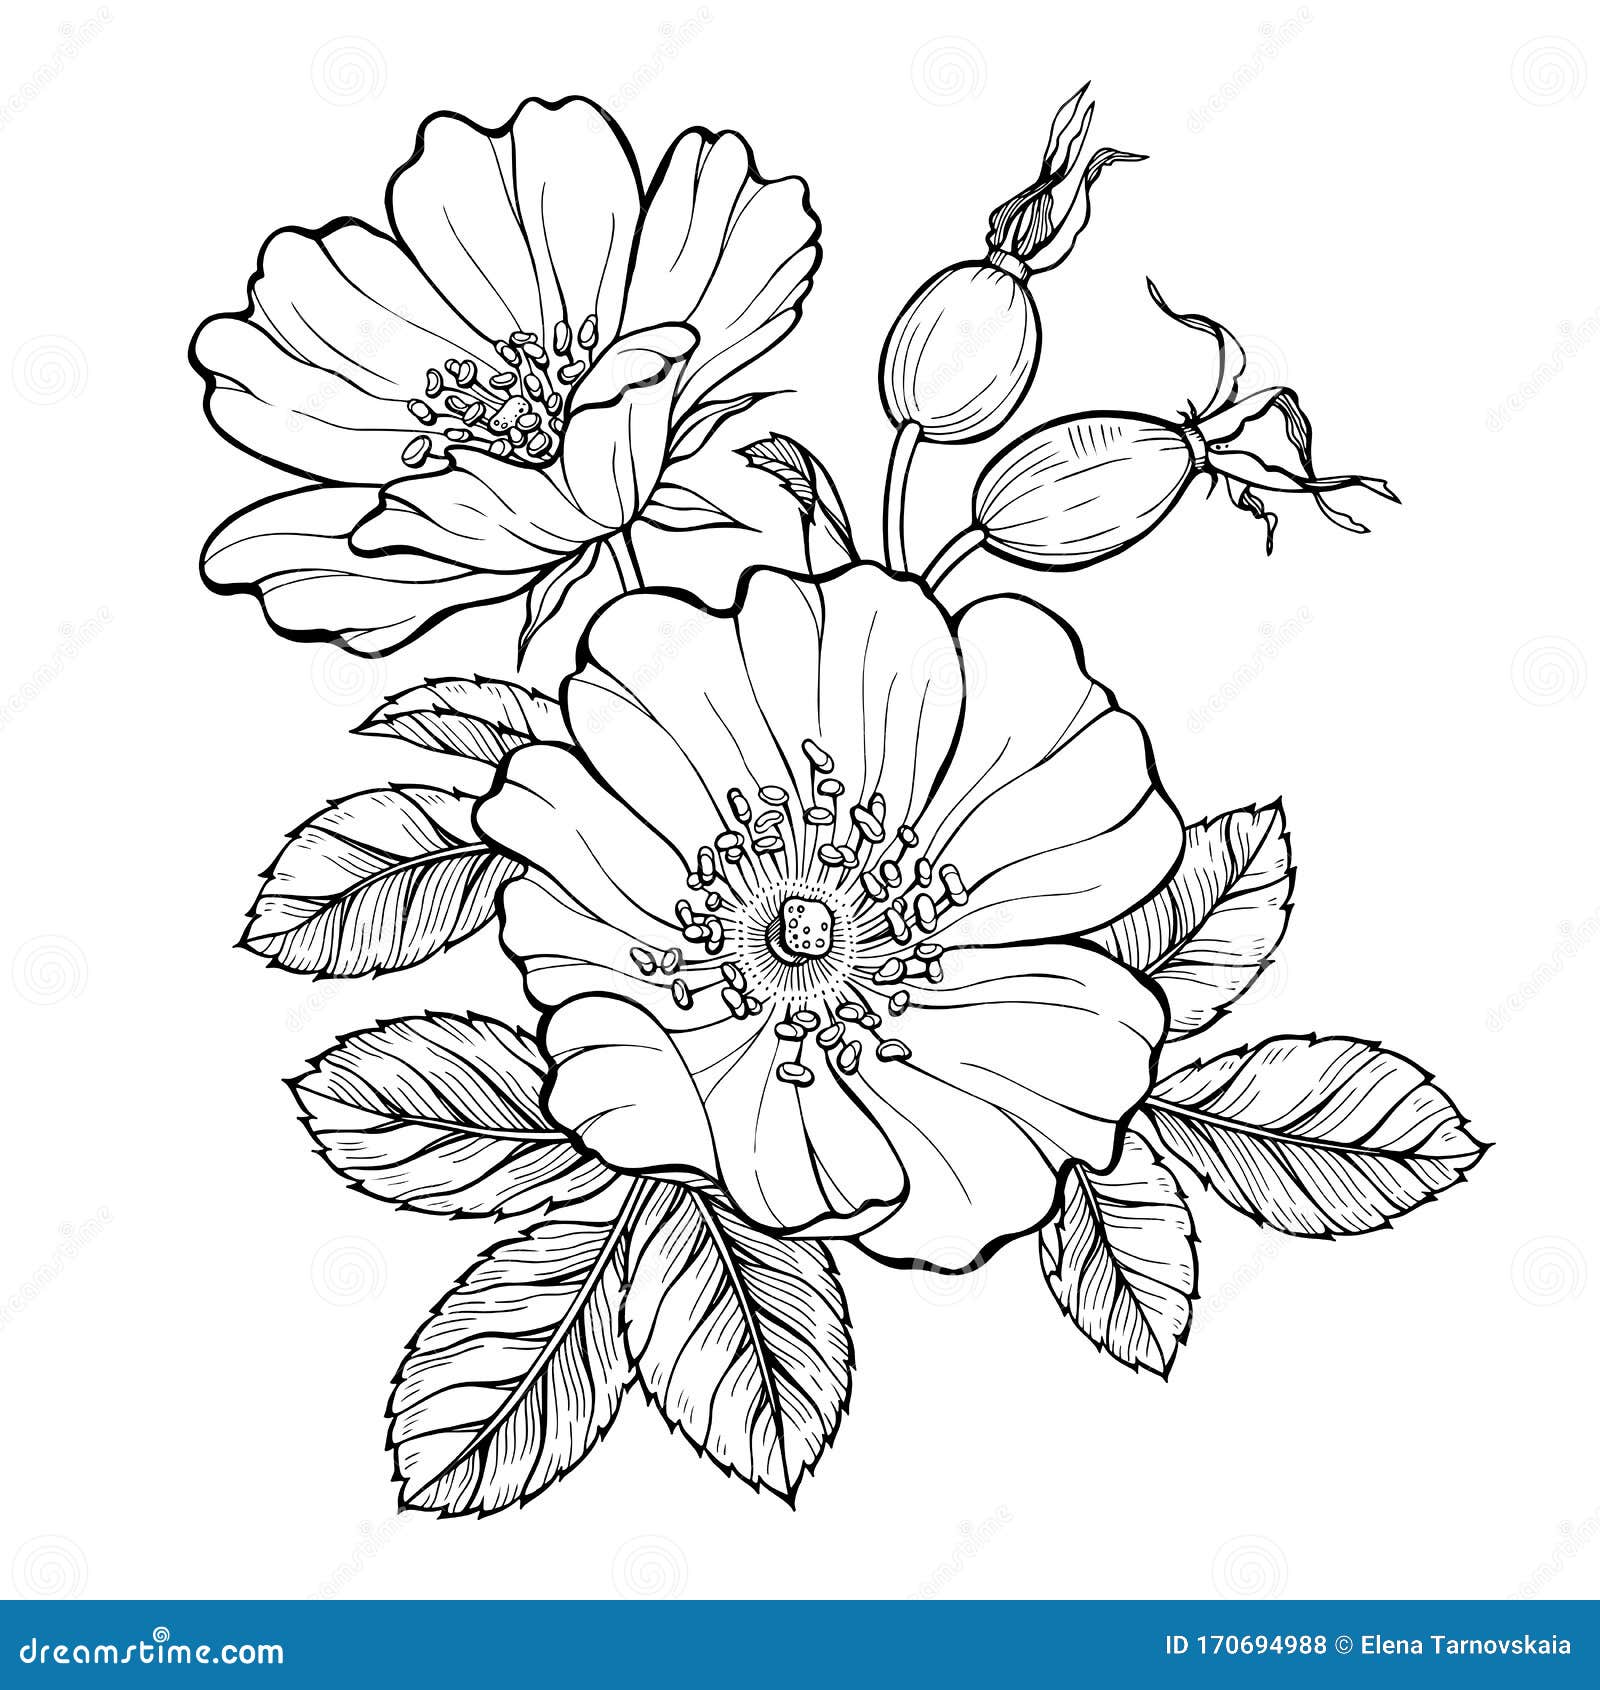 25 Beautiful Flower Drawing Information & Ideas - Brighter Craft |  Beautiful flower drawings, Flower line drawings, Flower sketches